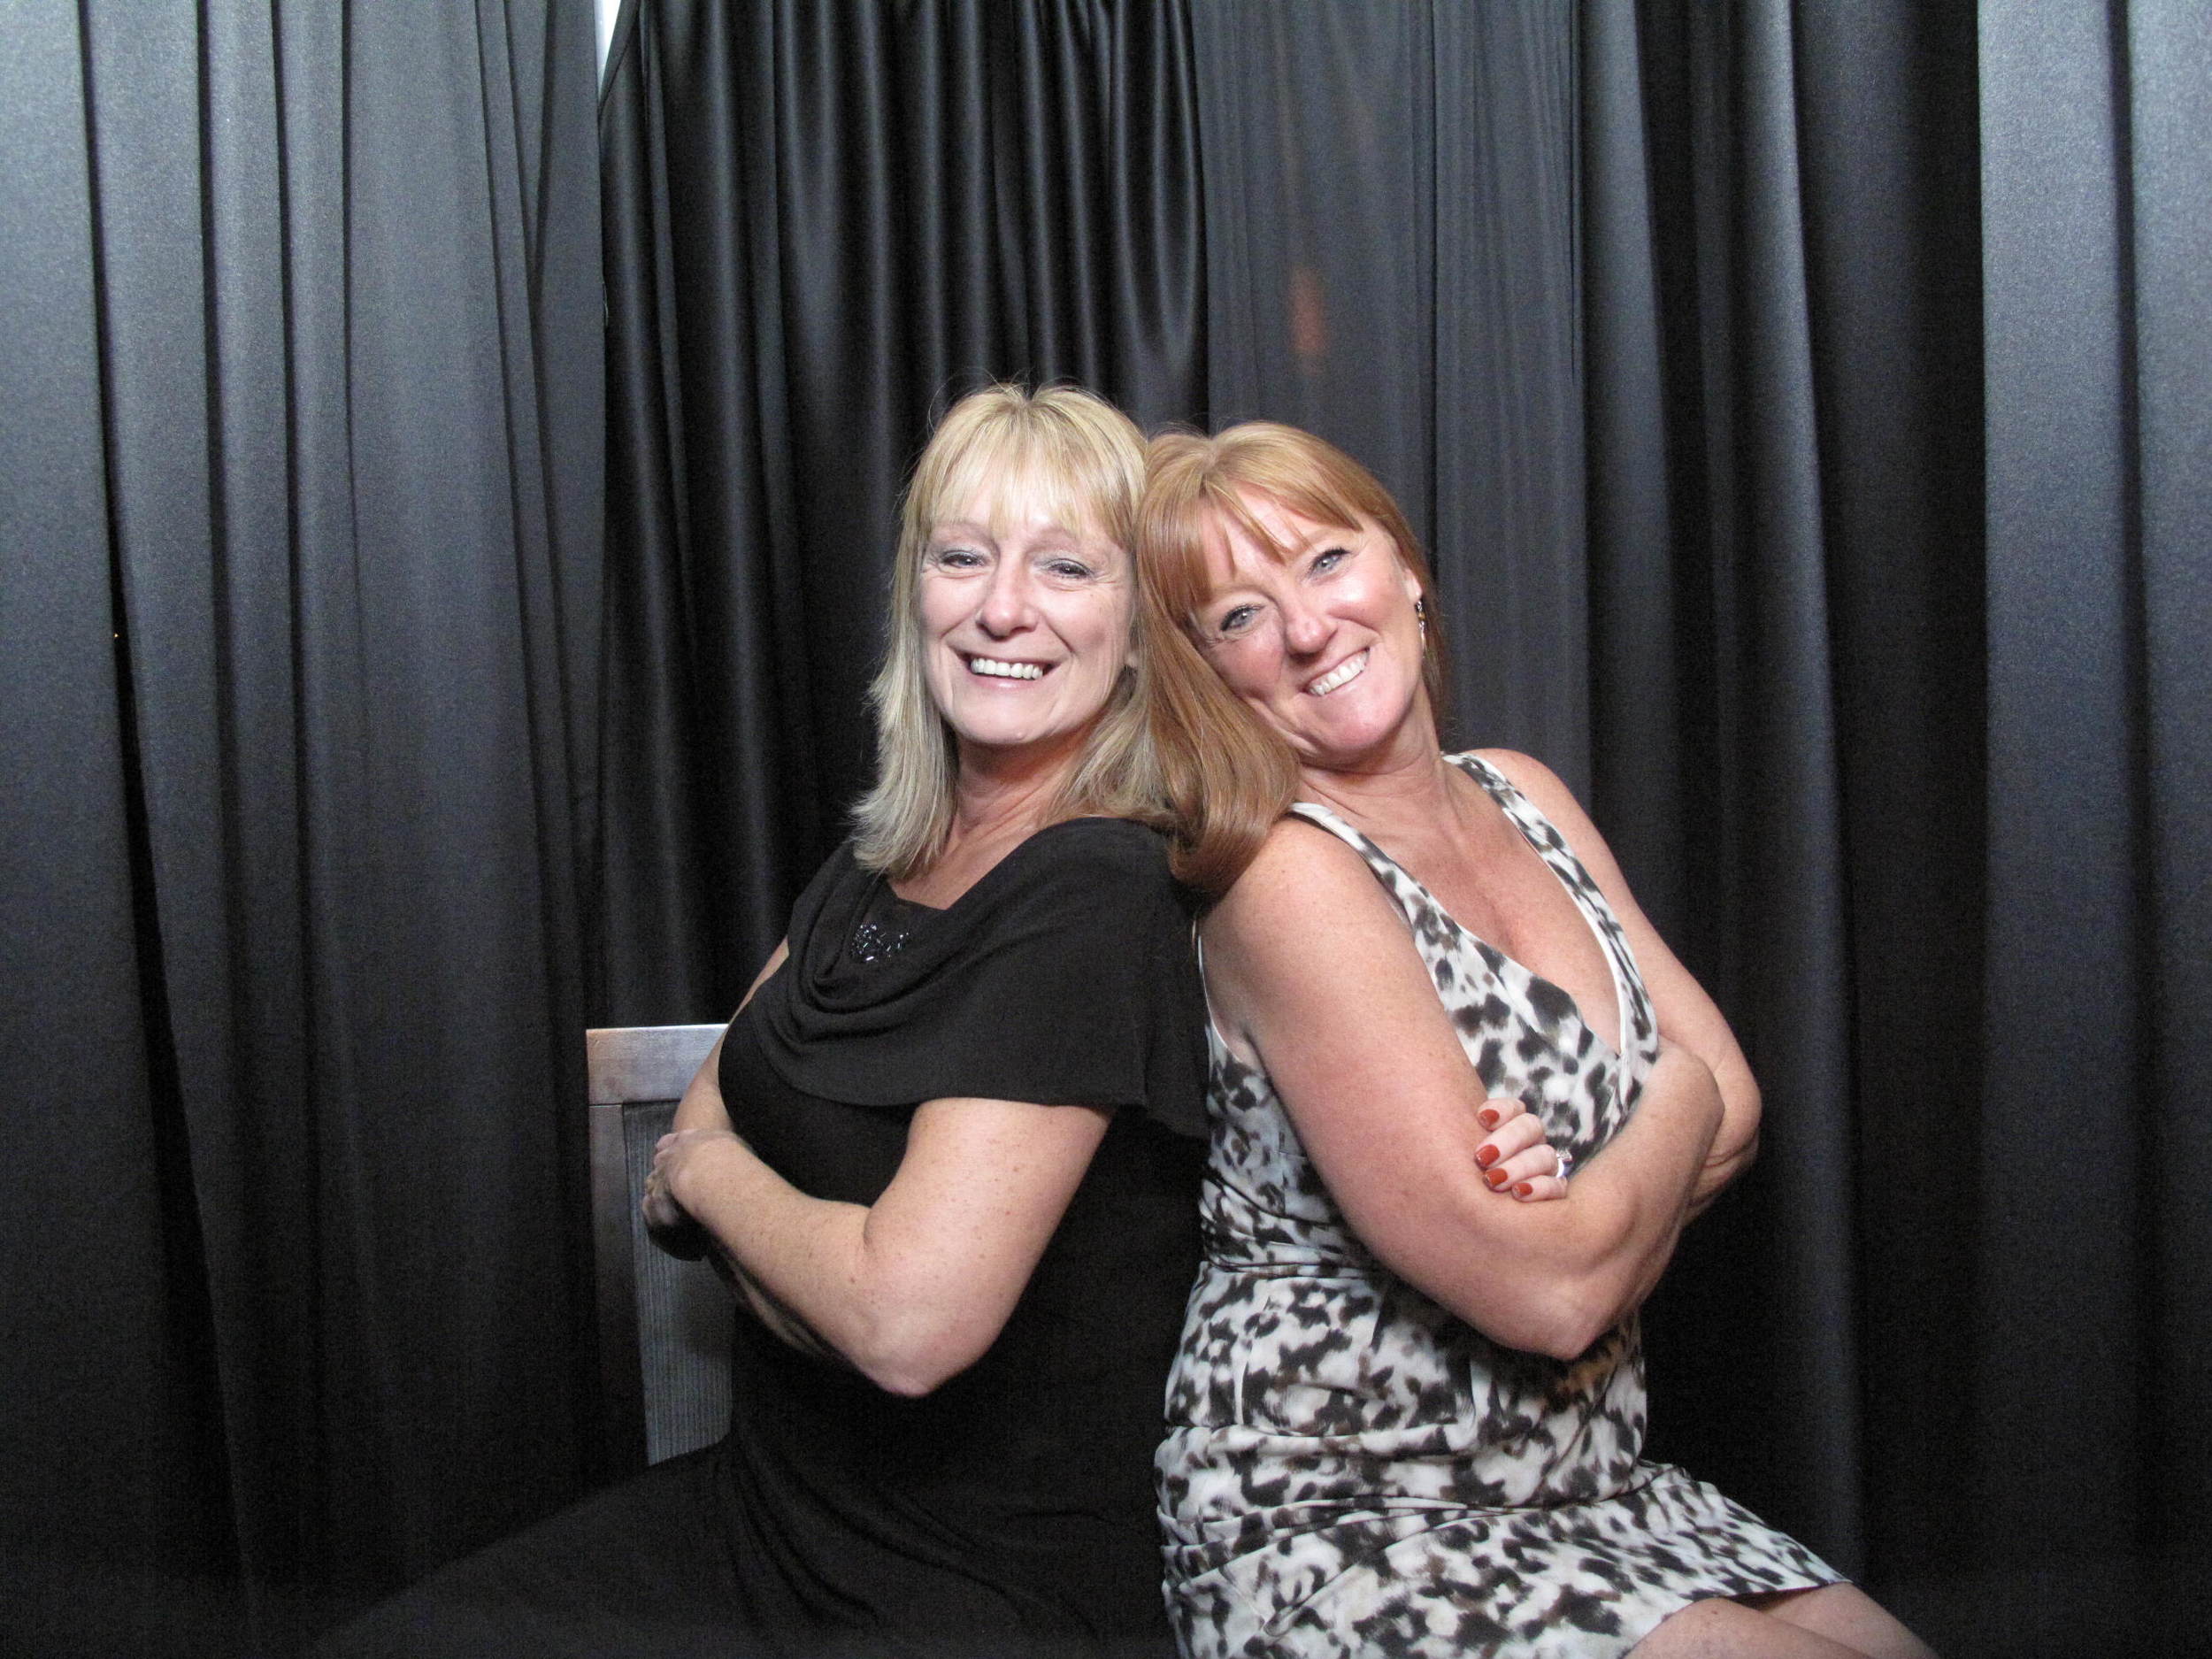 Snapshot Photobooths at McLoone's Supper Club in Asbury, New Jersey